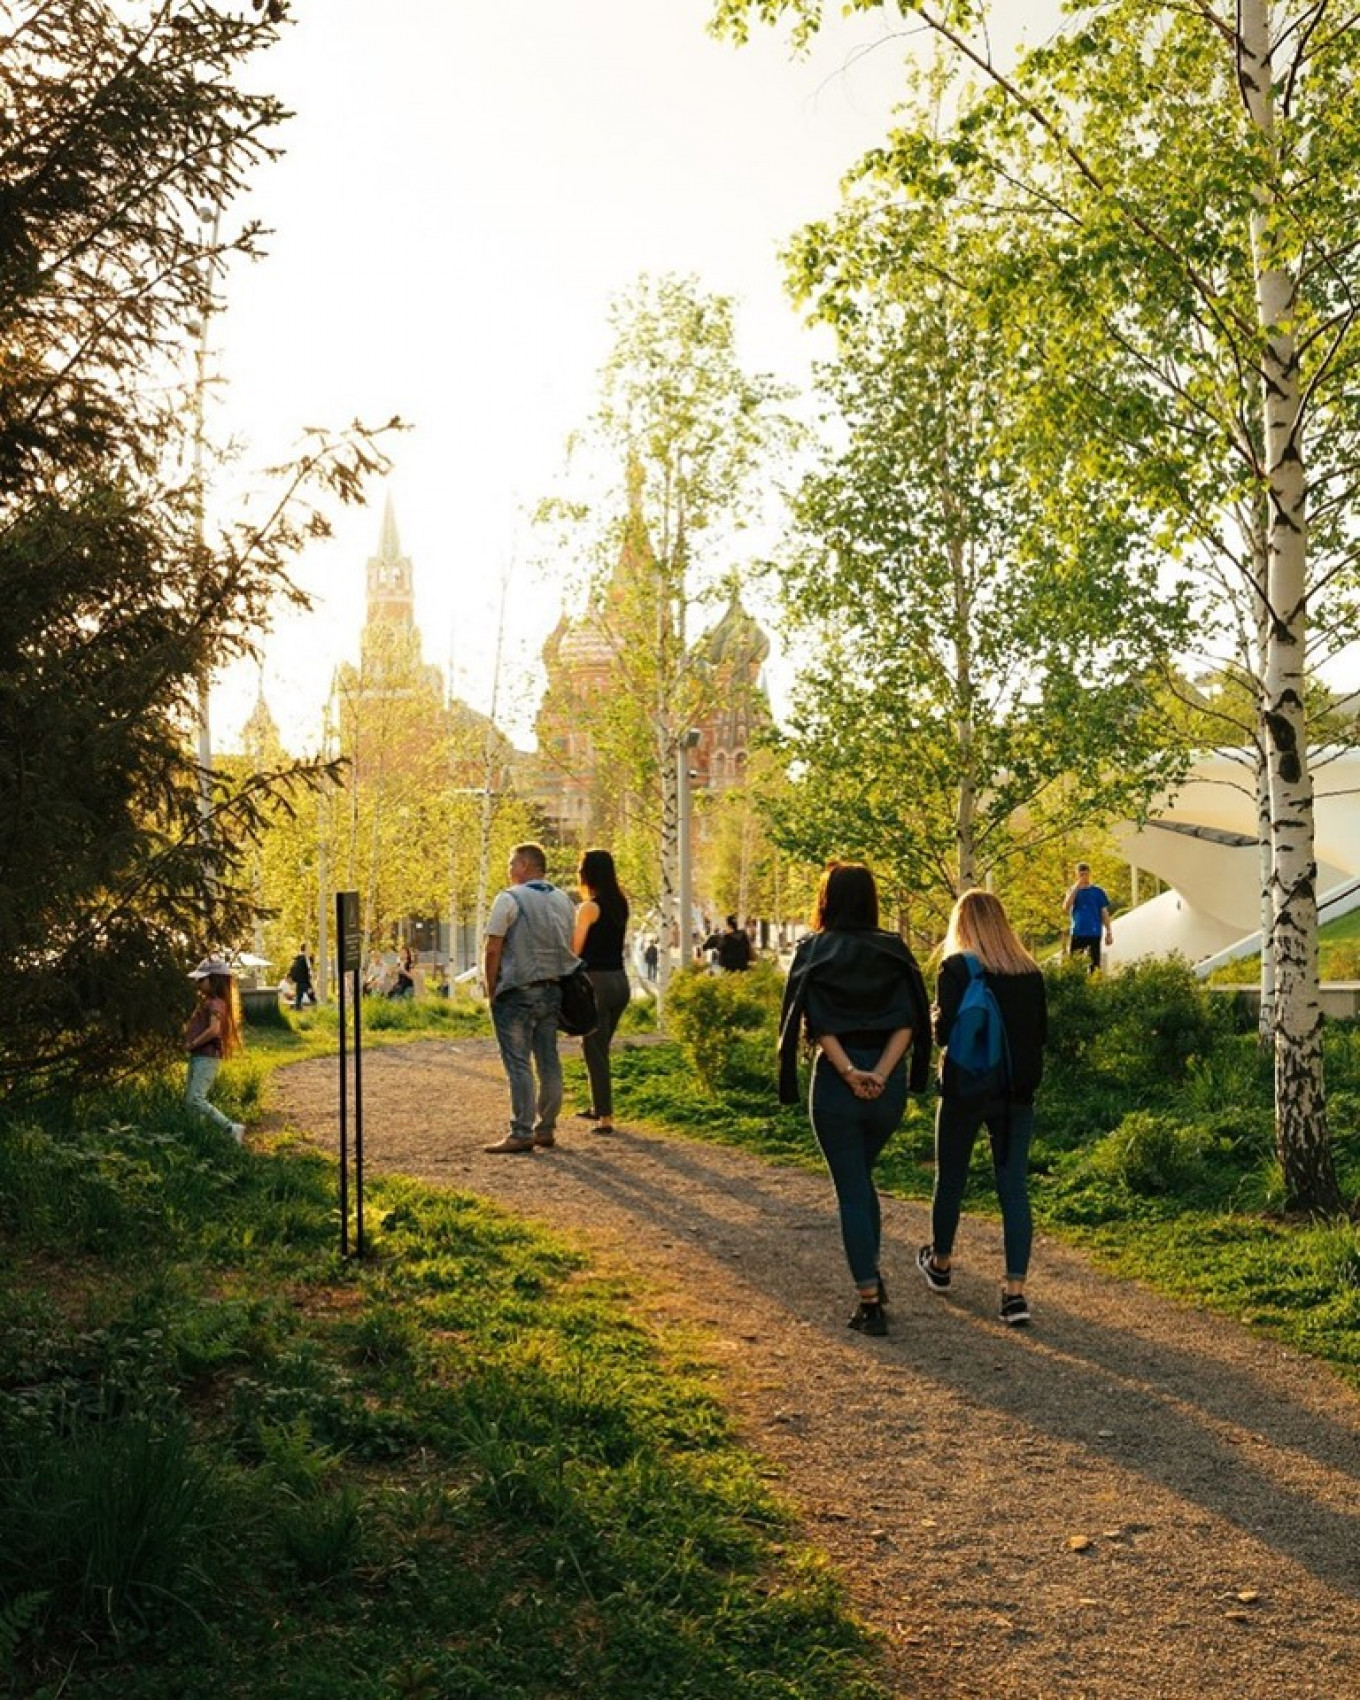 Best Outdoor activities and parks - Moscowliving.org